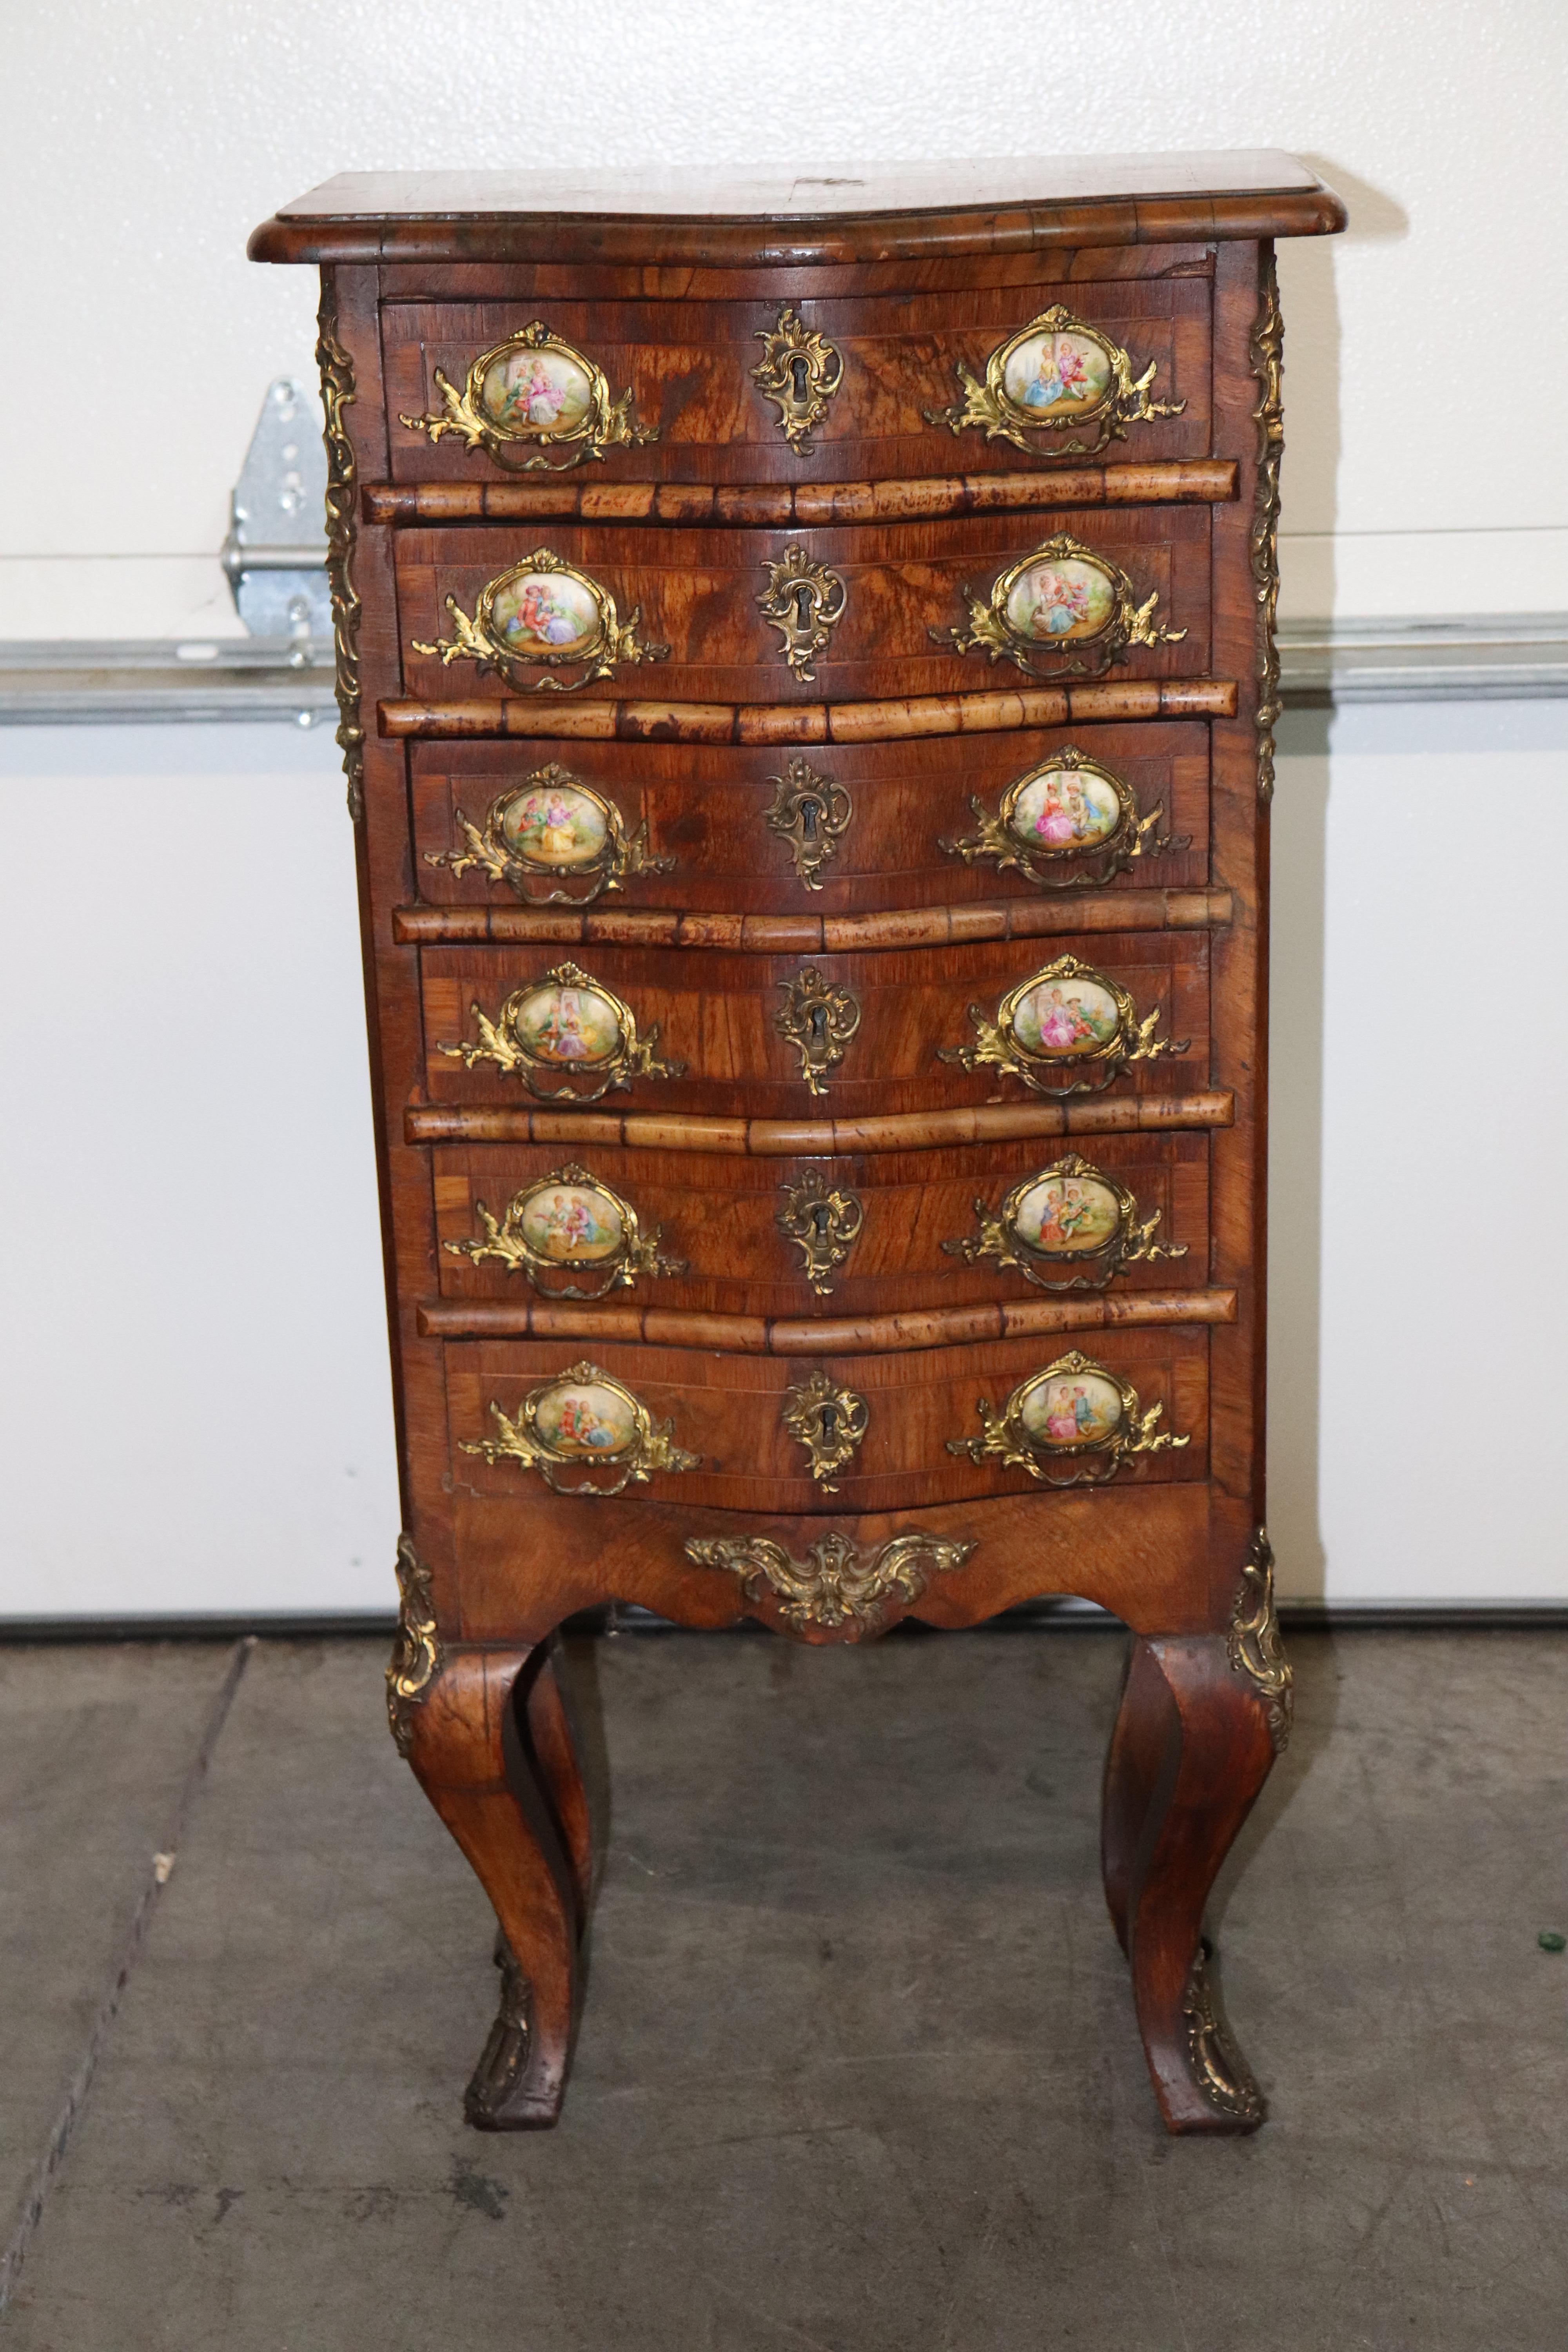 This is a fantastic and rare lingerie chest pf small size. At only 33 inches tall x 17 wide x 11 deep this piece is a small package with a lot of bling. The door handles are set atop porcelain placques in the style of sevres and in good condition.